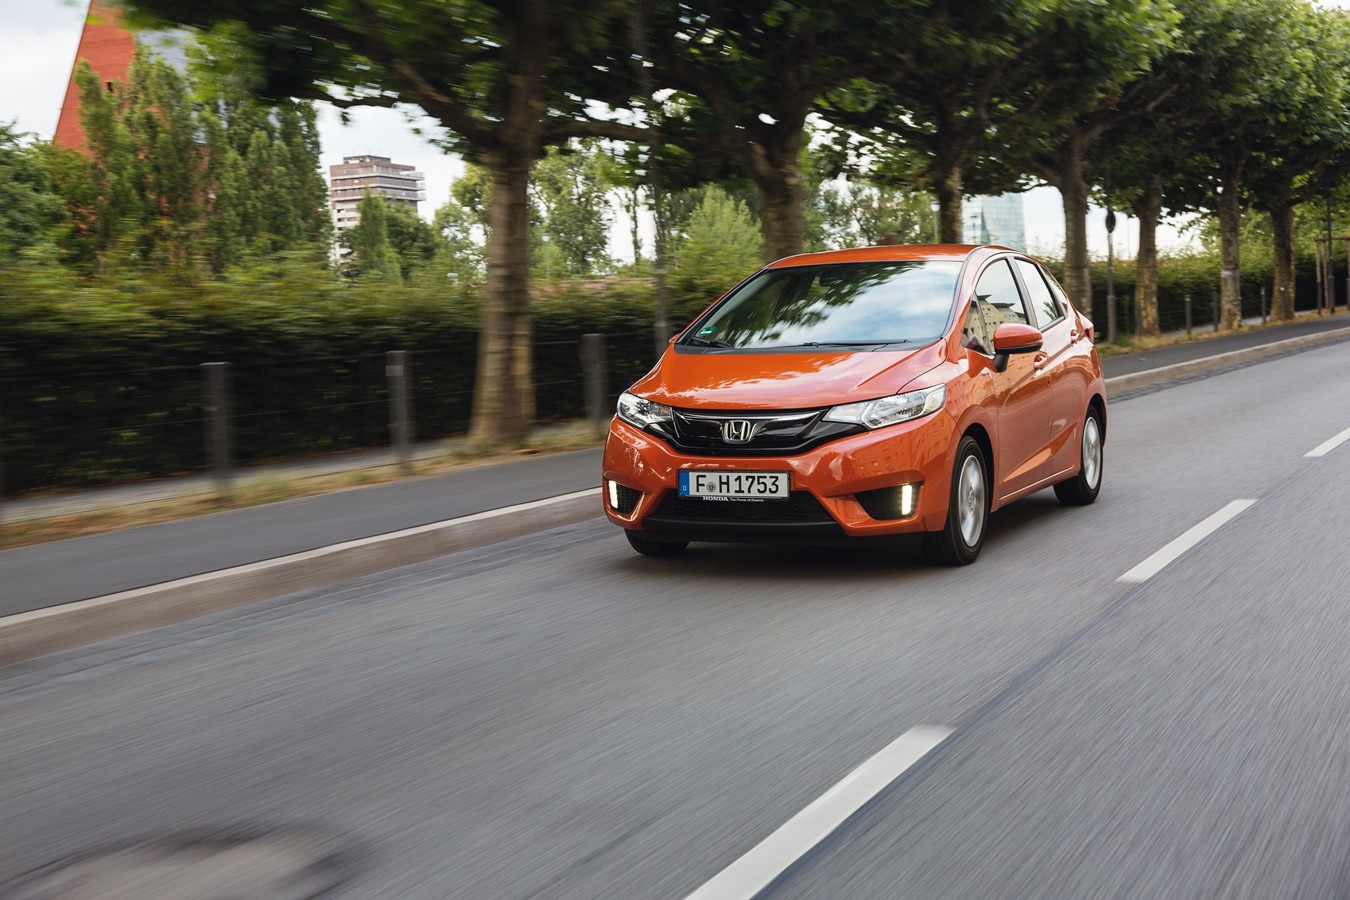 Honda Named Most Reliable Manufacturer in Survey of Over 30,000 European Drivers